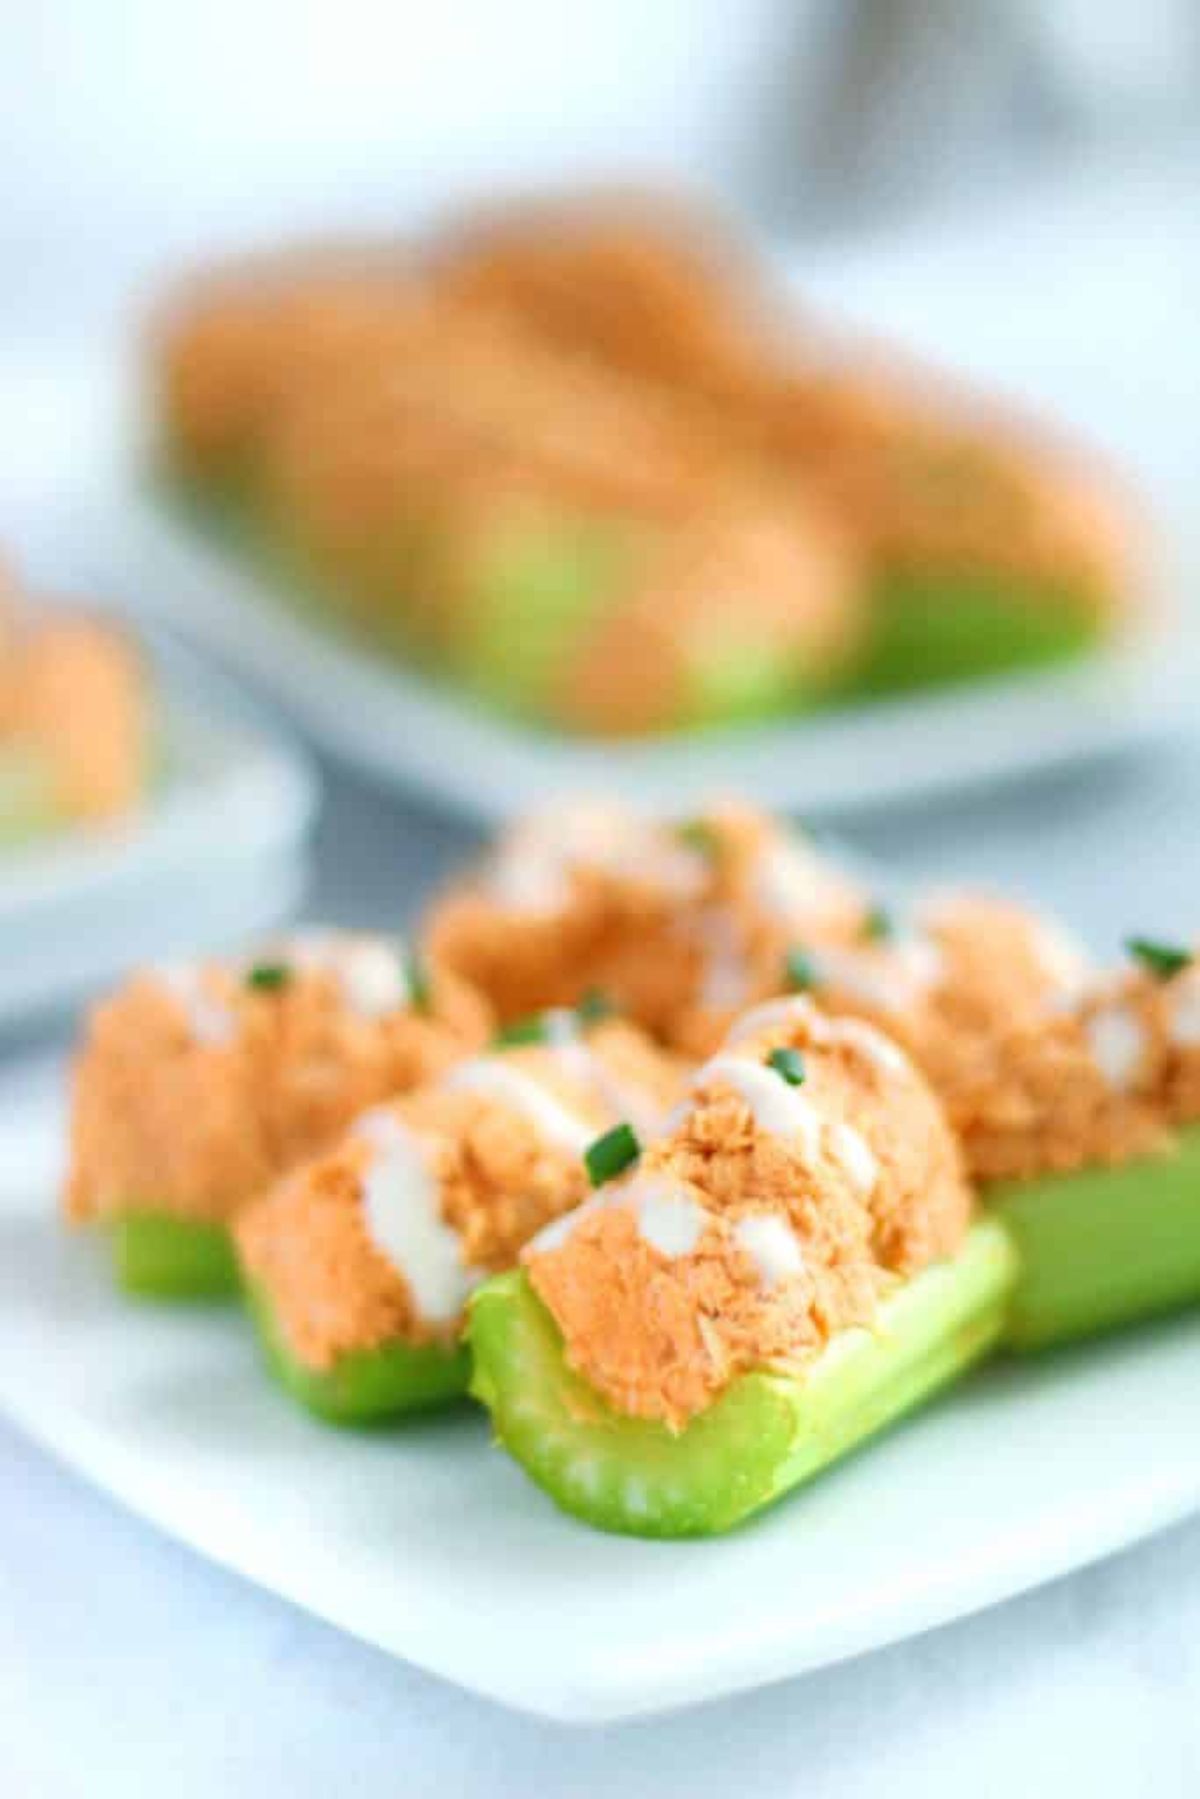 A blurred shot of a whote plate with celery sticks stuffed with tuna salad. In the foreground is a small plate filled with small celery sections stuffed with buffalo tuna salad